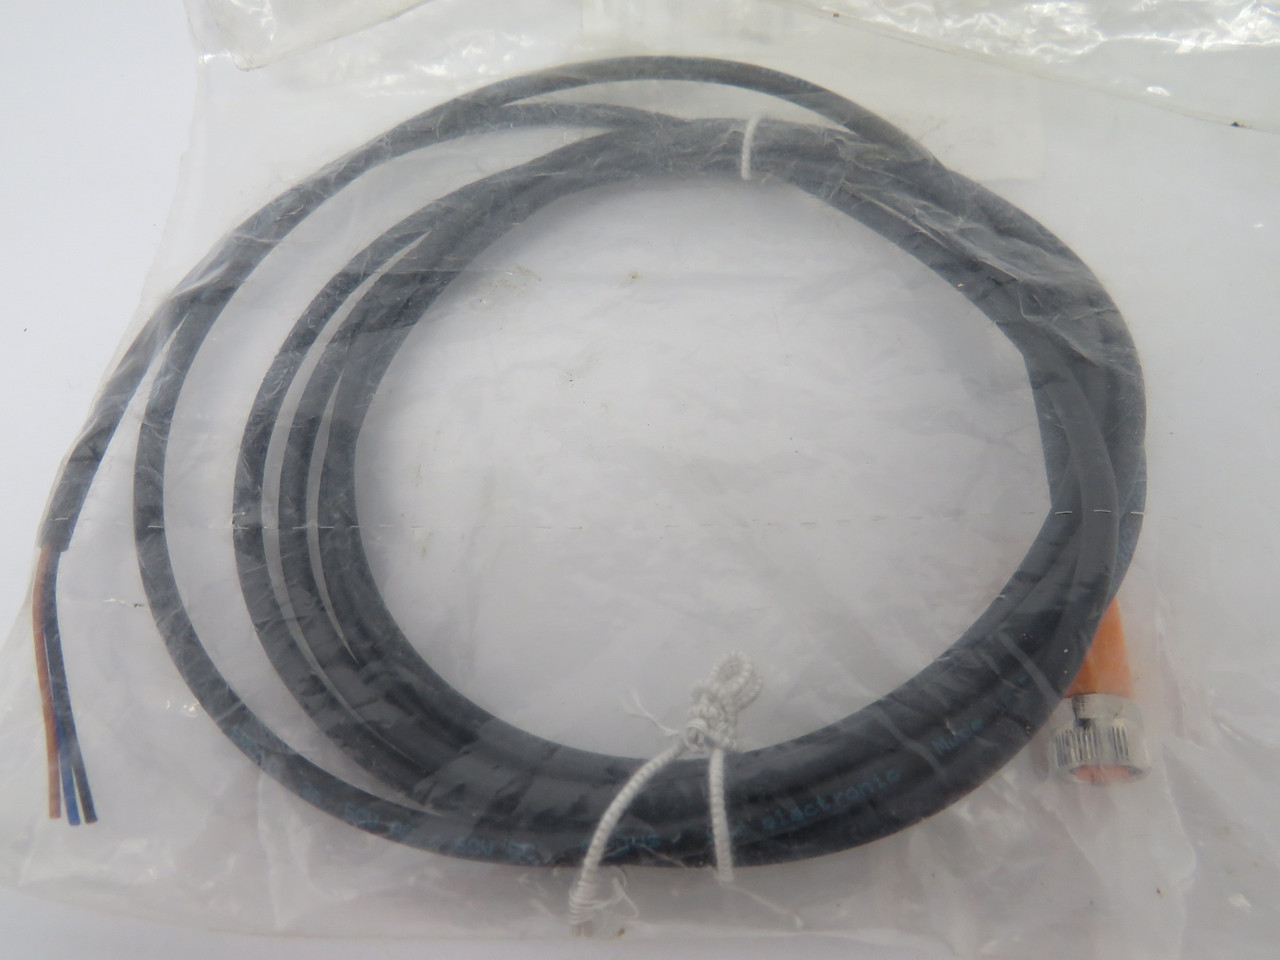 Ifm EVC141 Connecting Cable w/Socket 23 AWG 50VAC 60VDC 3A 2m NWB